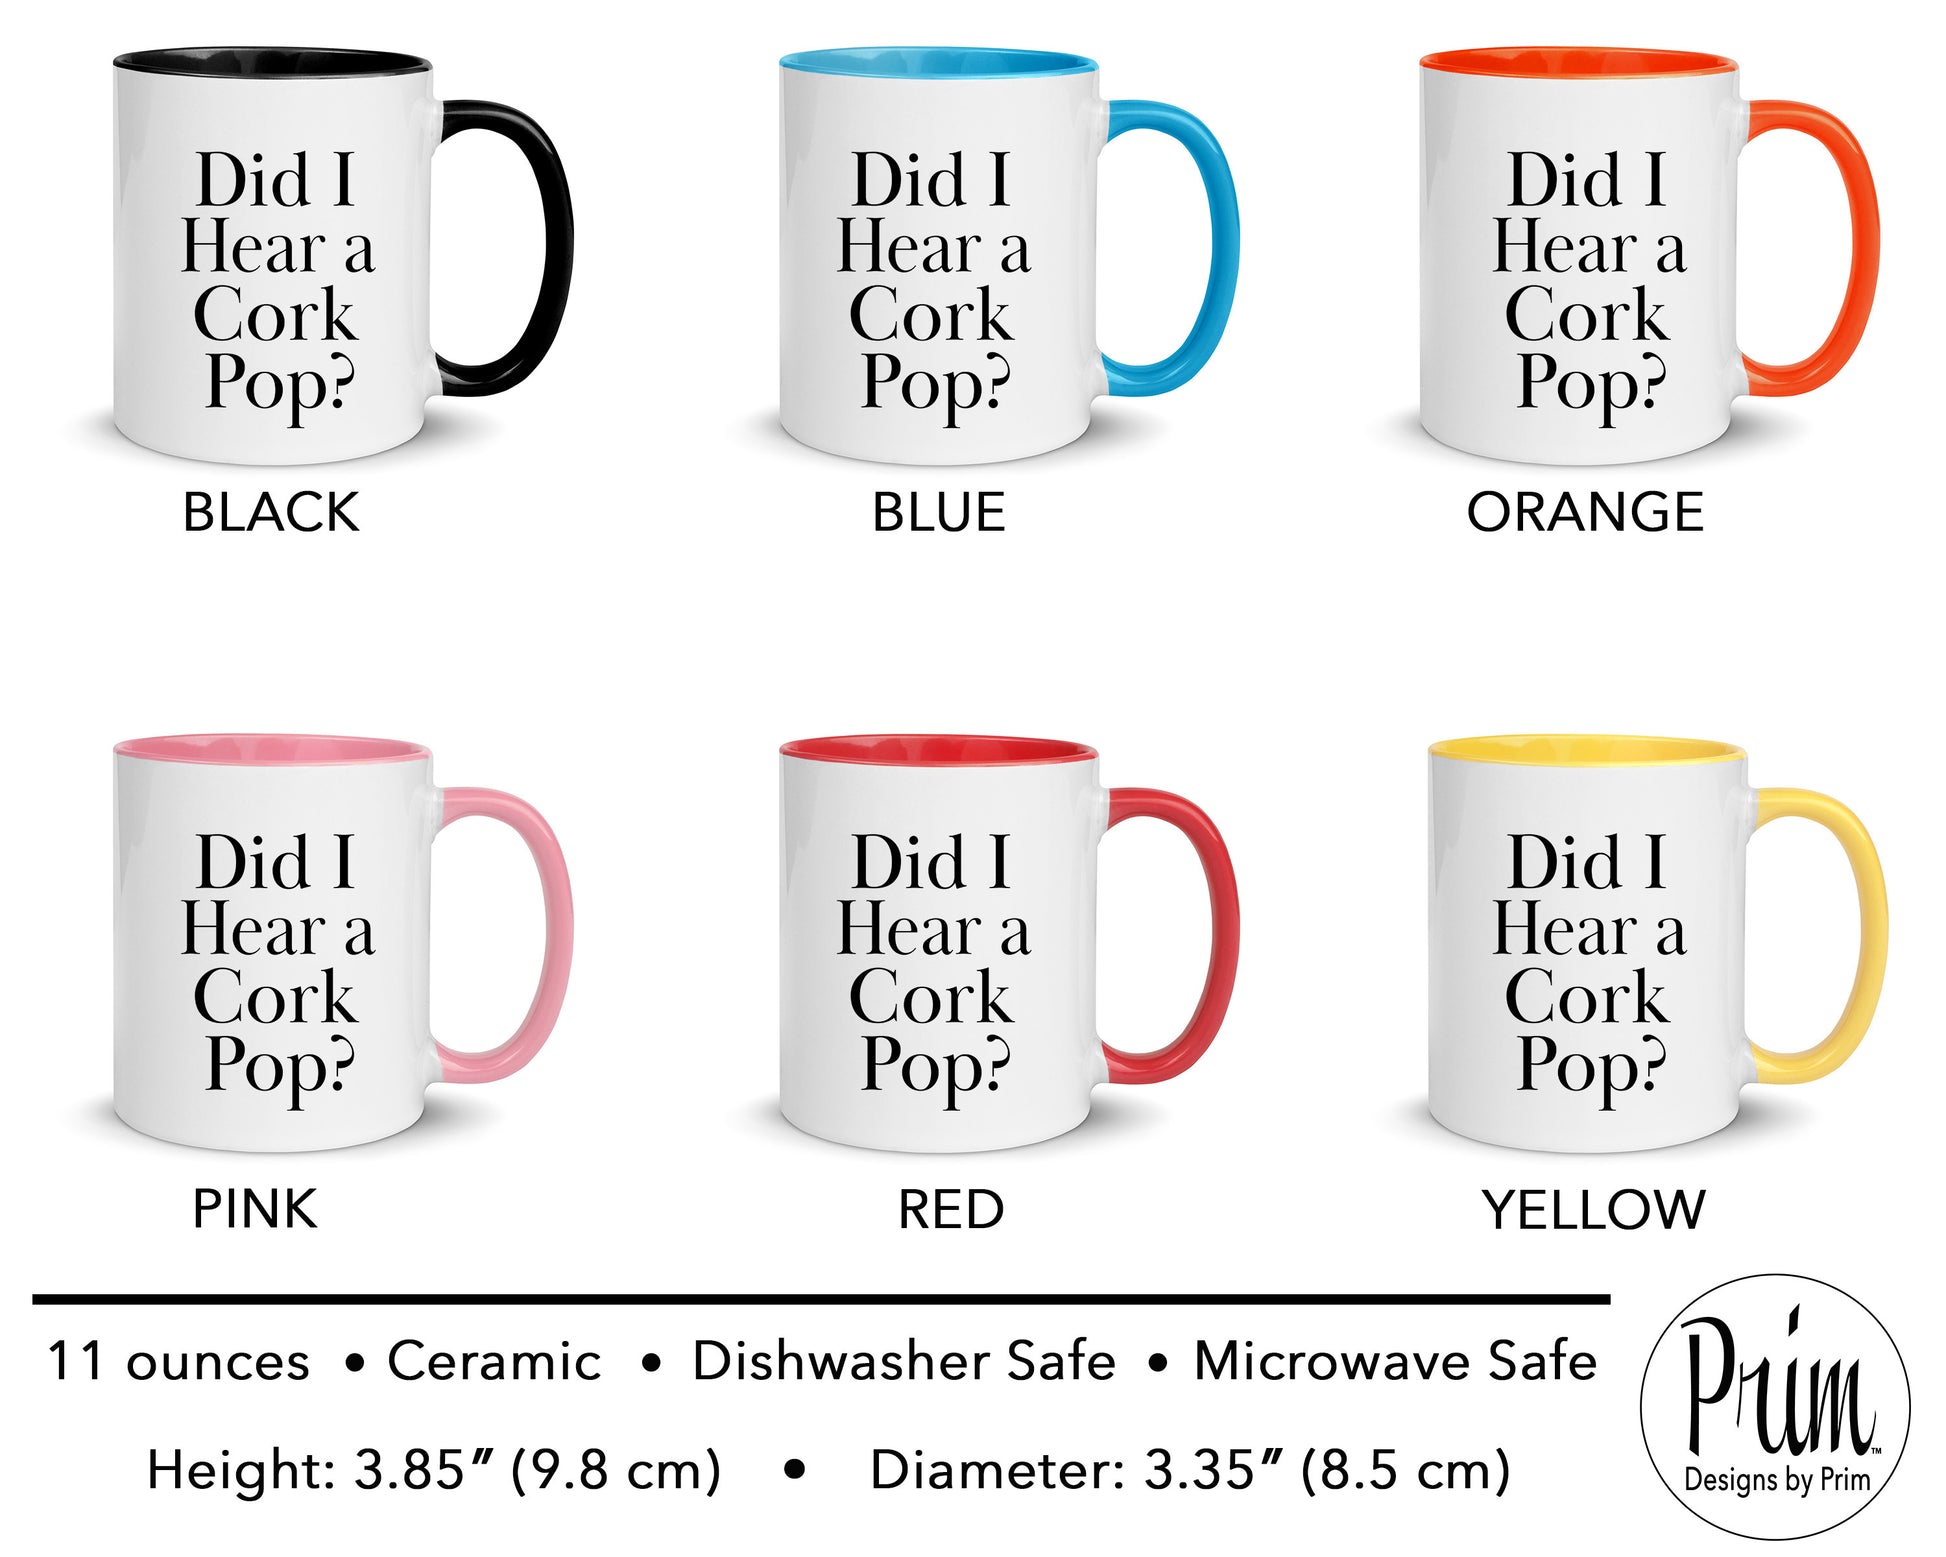 Designs by Prim Did I Hear a Cork Pop? 11 Ounce Ceramic Mug | Funny Happy Hour Sunday Mimosas Champagne Prosecco Graphic Typography Coffee Tea Cup